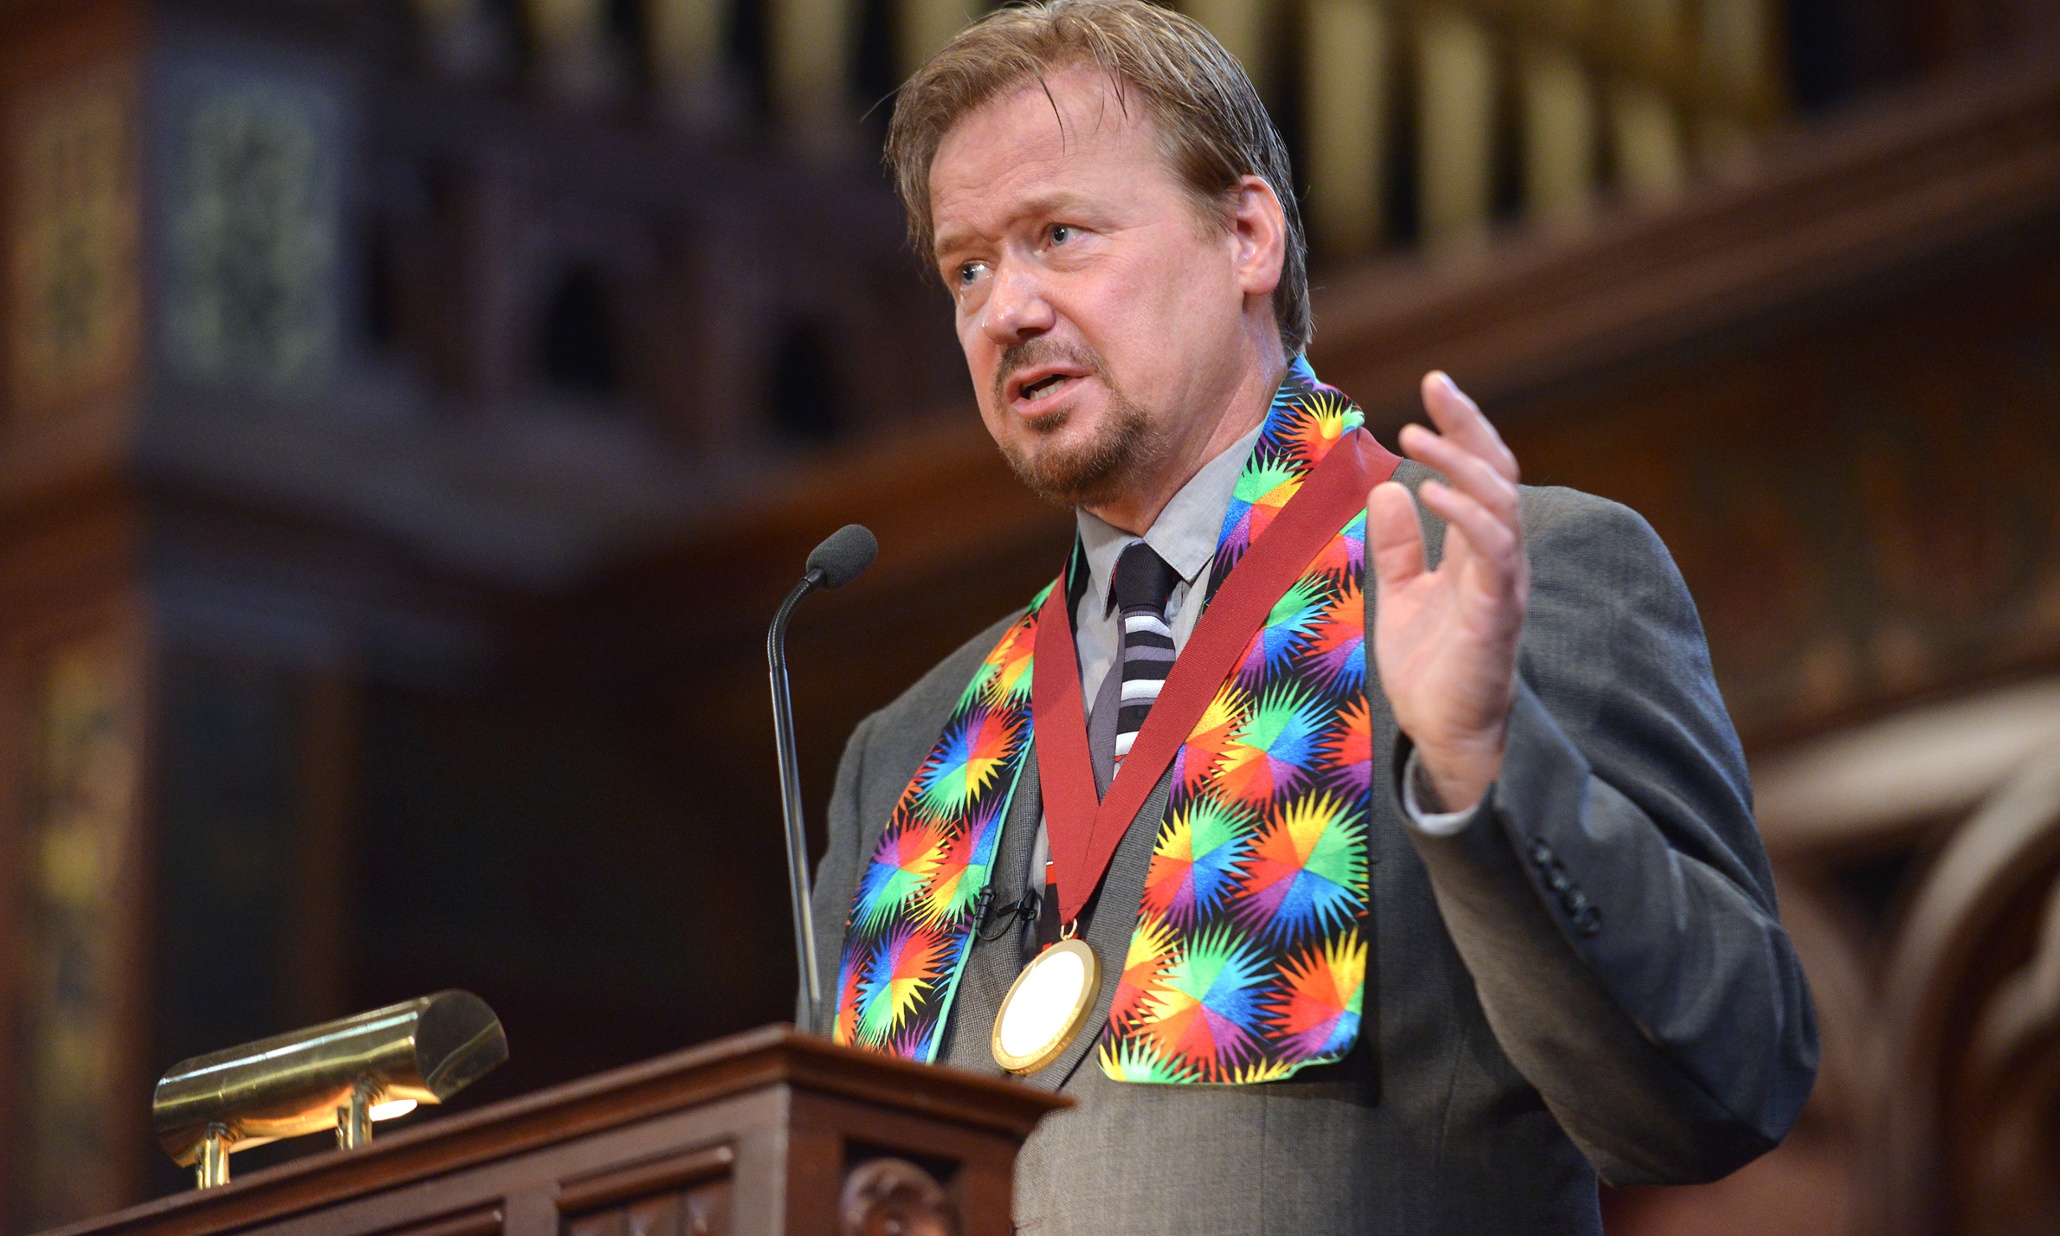 Methodist Pastor Defrocked For Holding Gay Marriage Wins Church Appeal